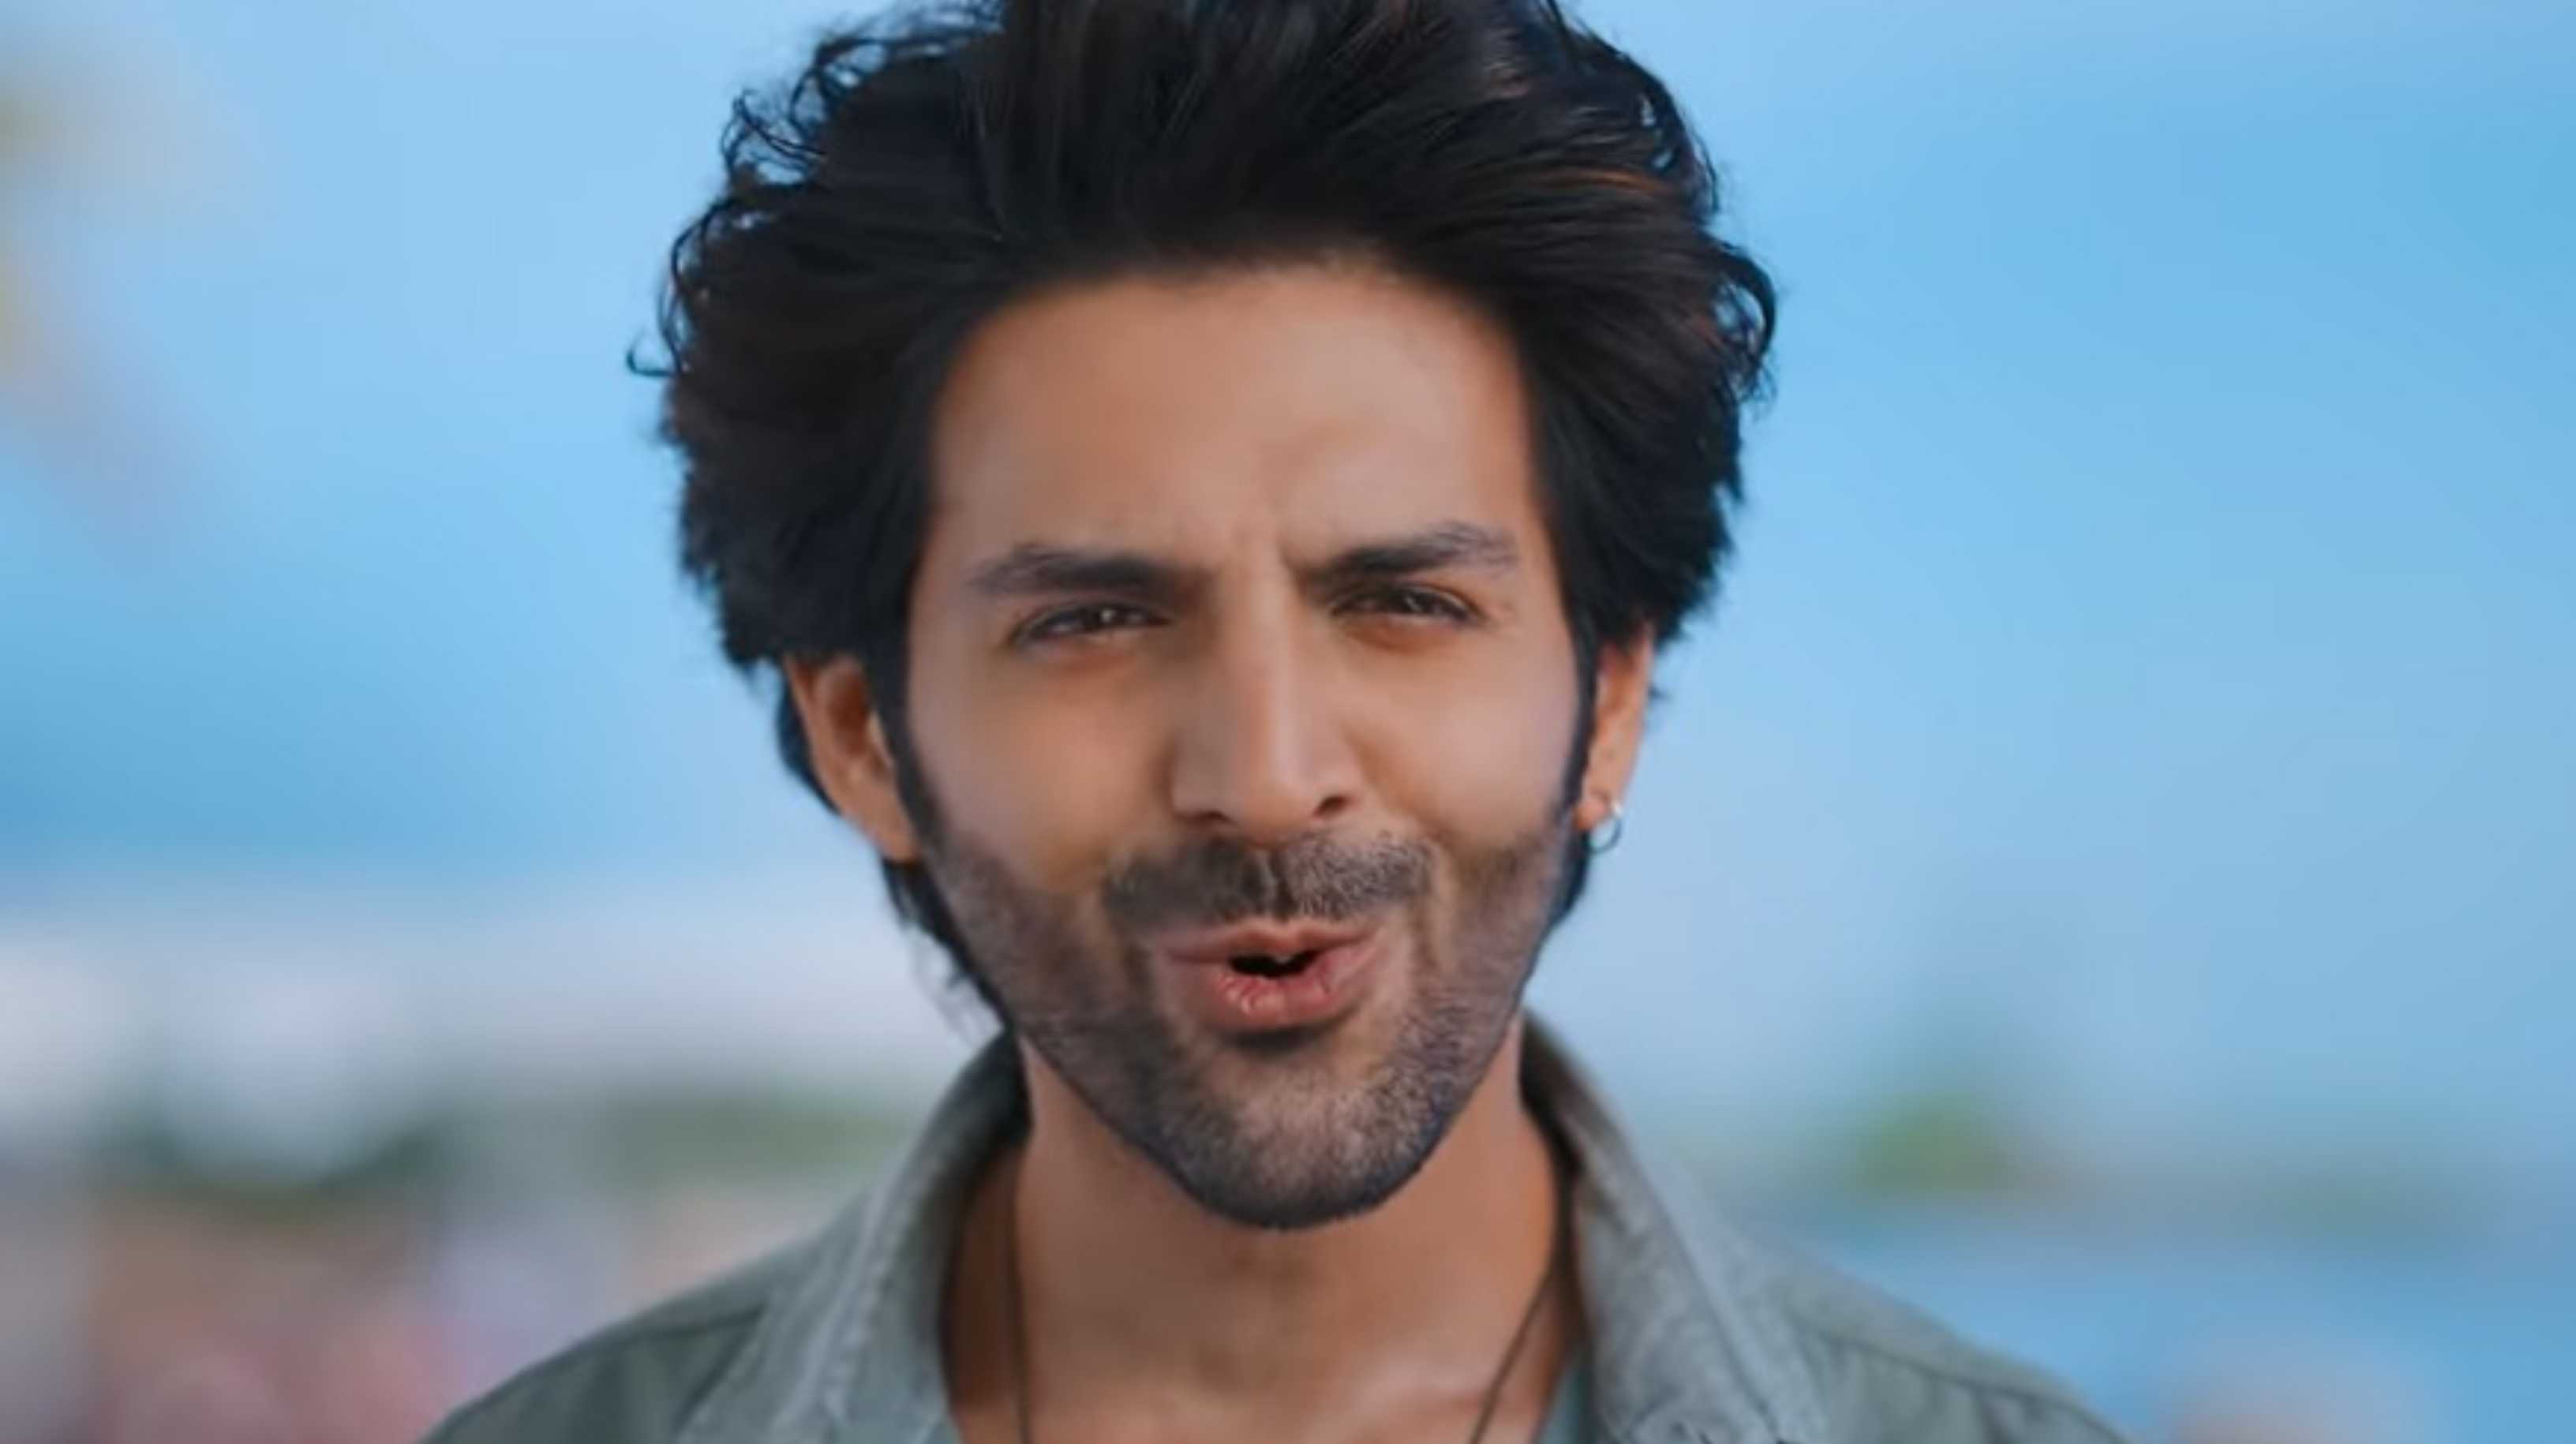 Did Kartik Aaryan forego his fees for Shehzada? Here’s what we know